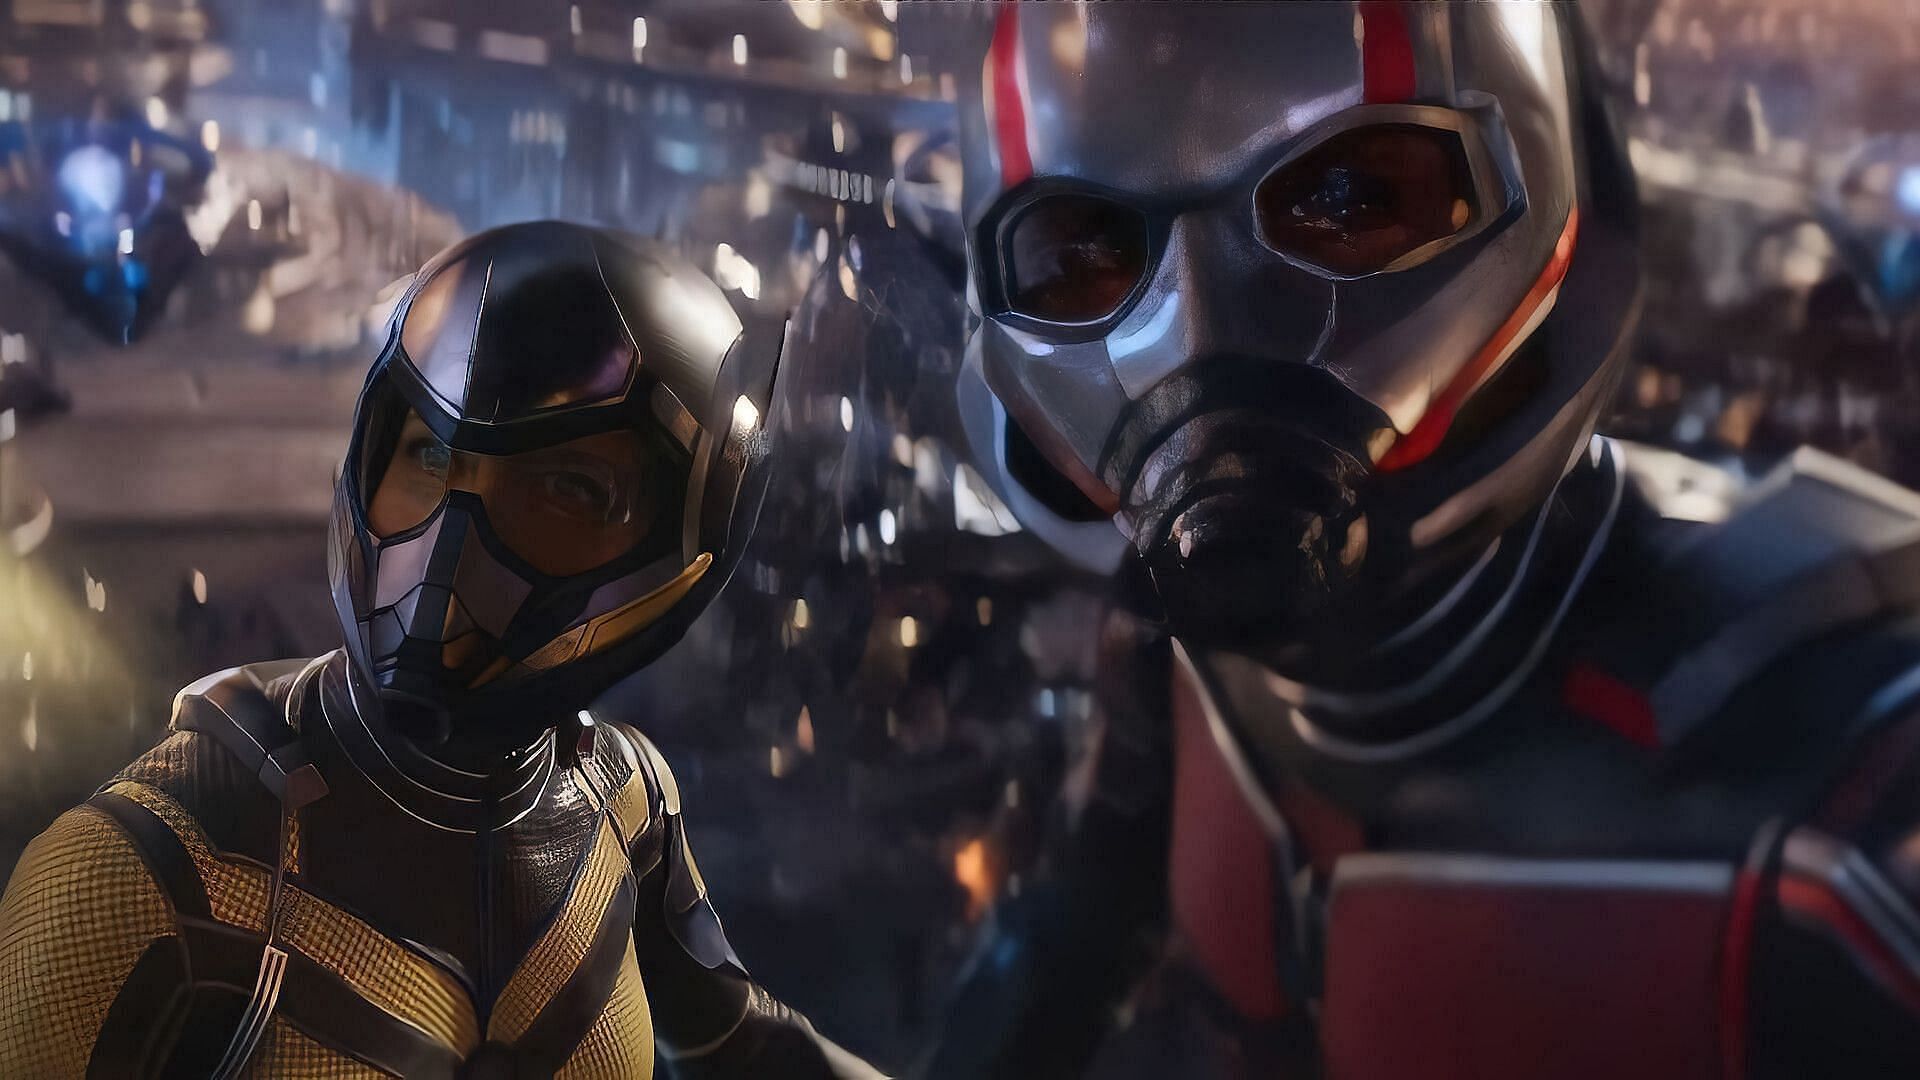 Ant-Man' Box Office Predicted To Make $65 Million On Opening